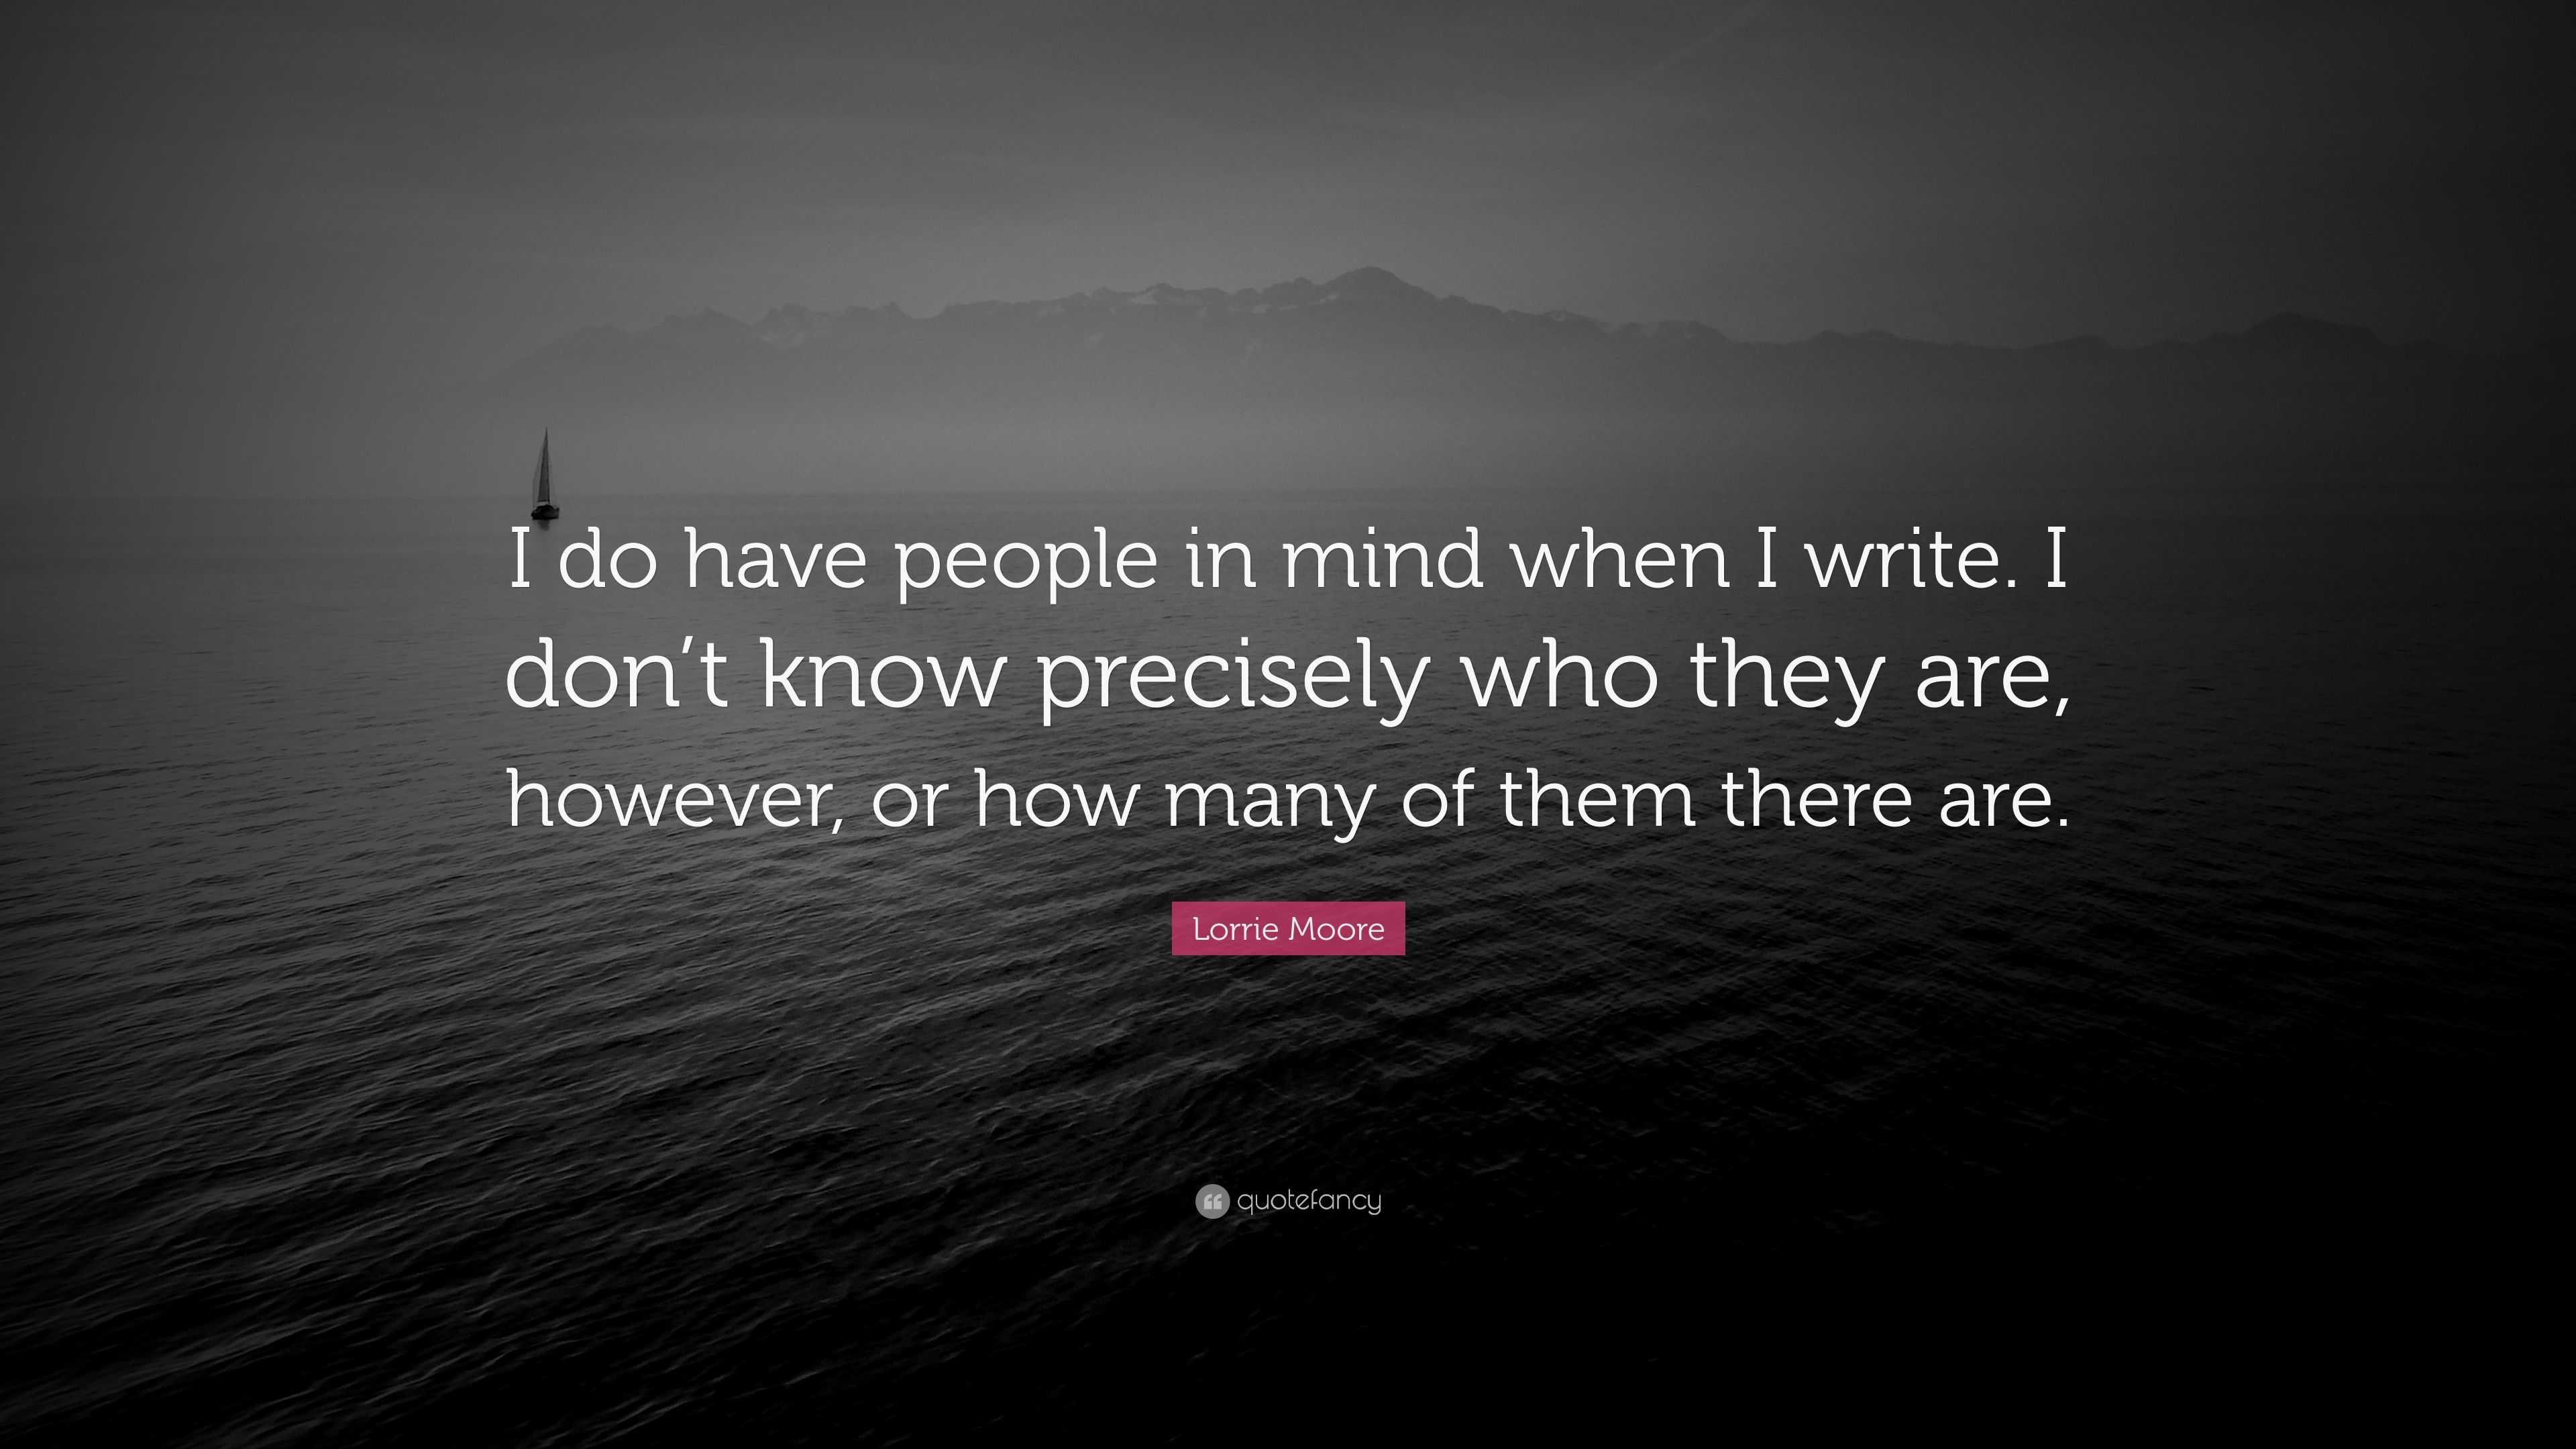 Lorrie Moore Quote “i Do Have People In Mind When I Write I Don T Know Precisely Who They Are